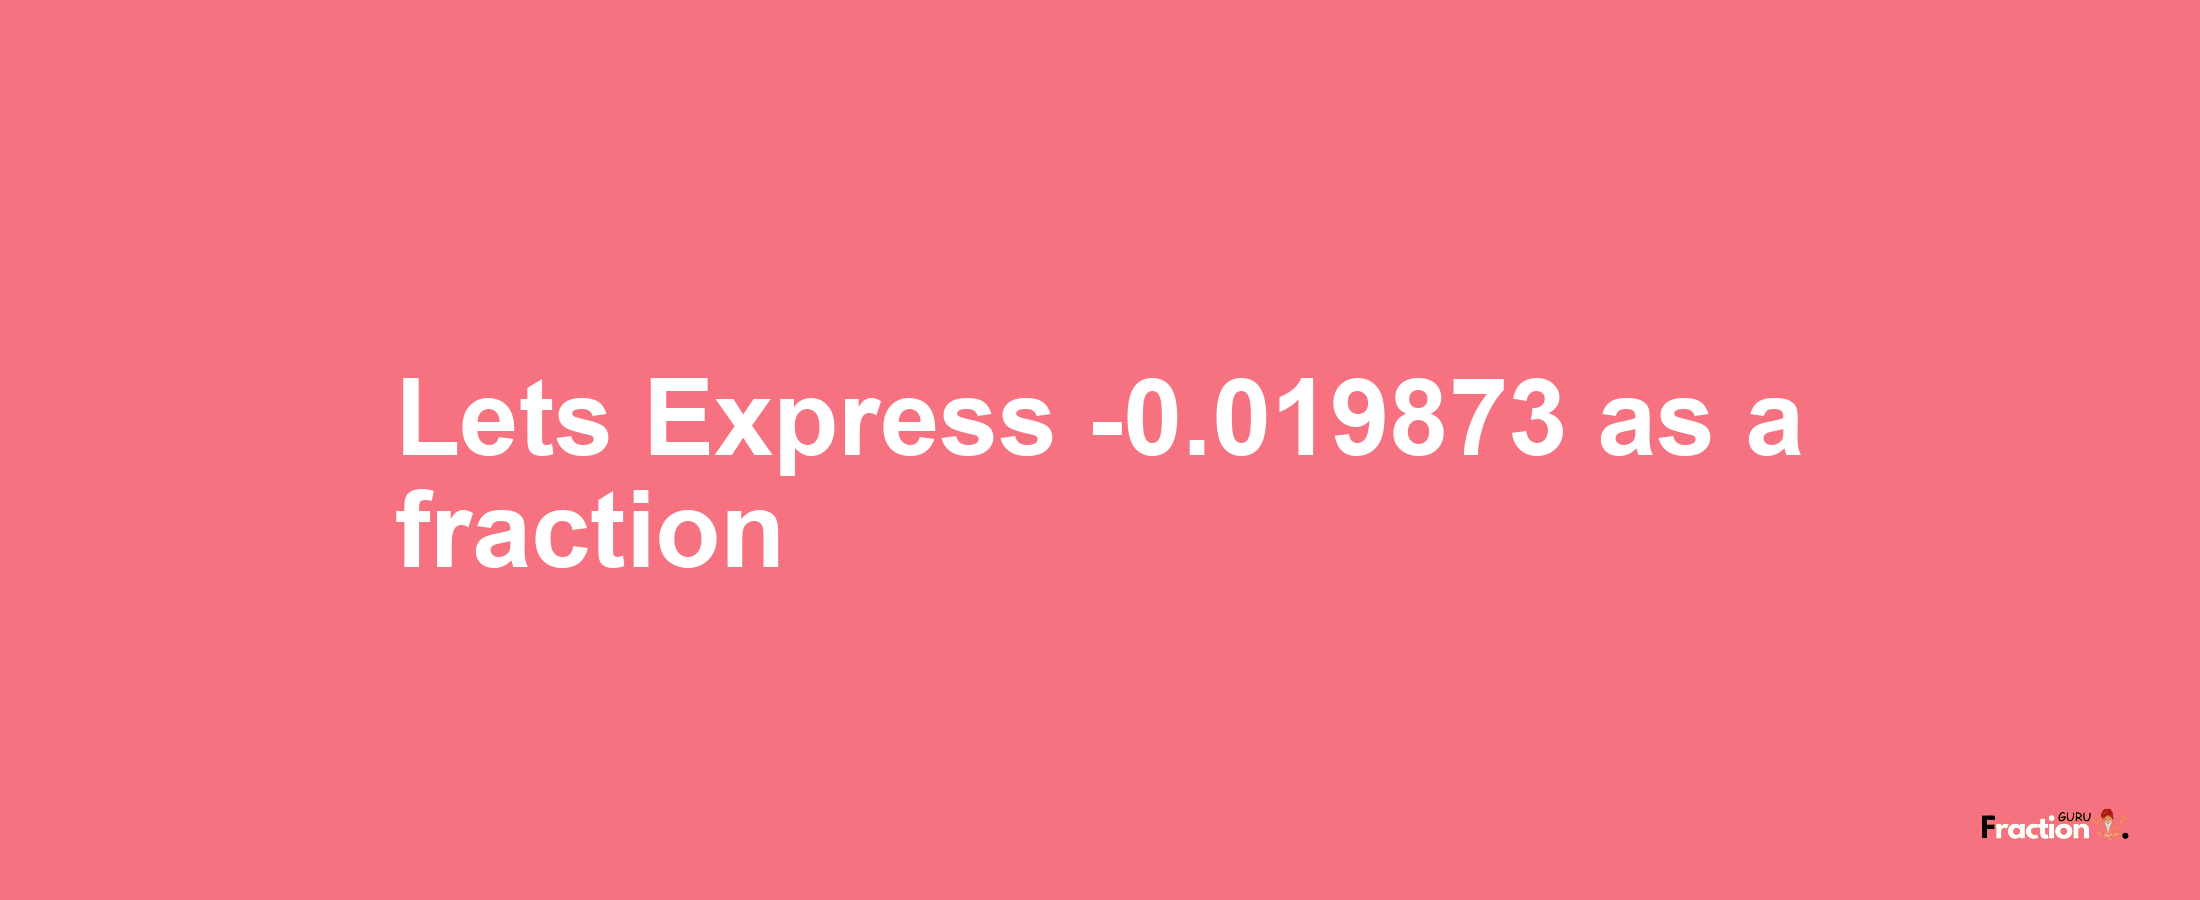 Lets Express -0.019873 as afraction